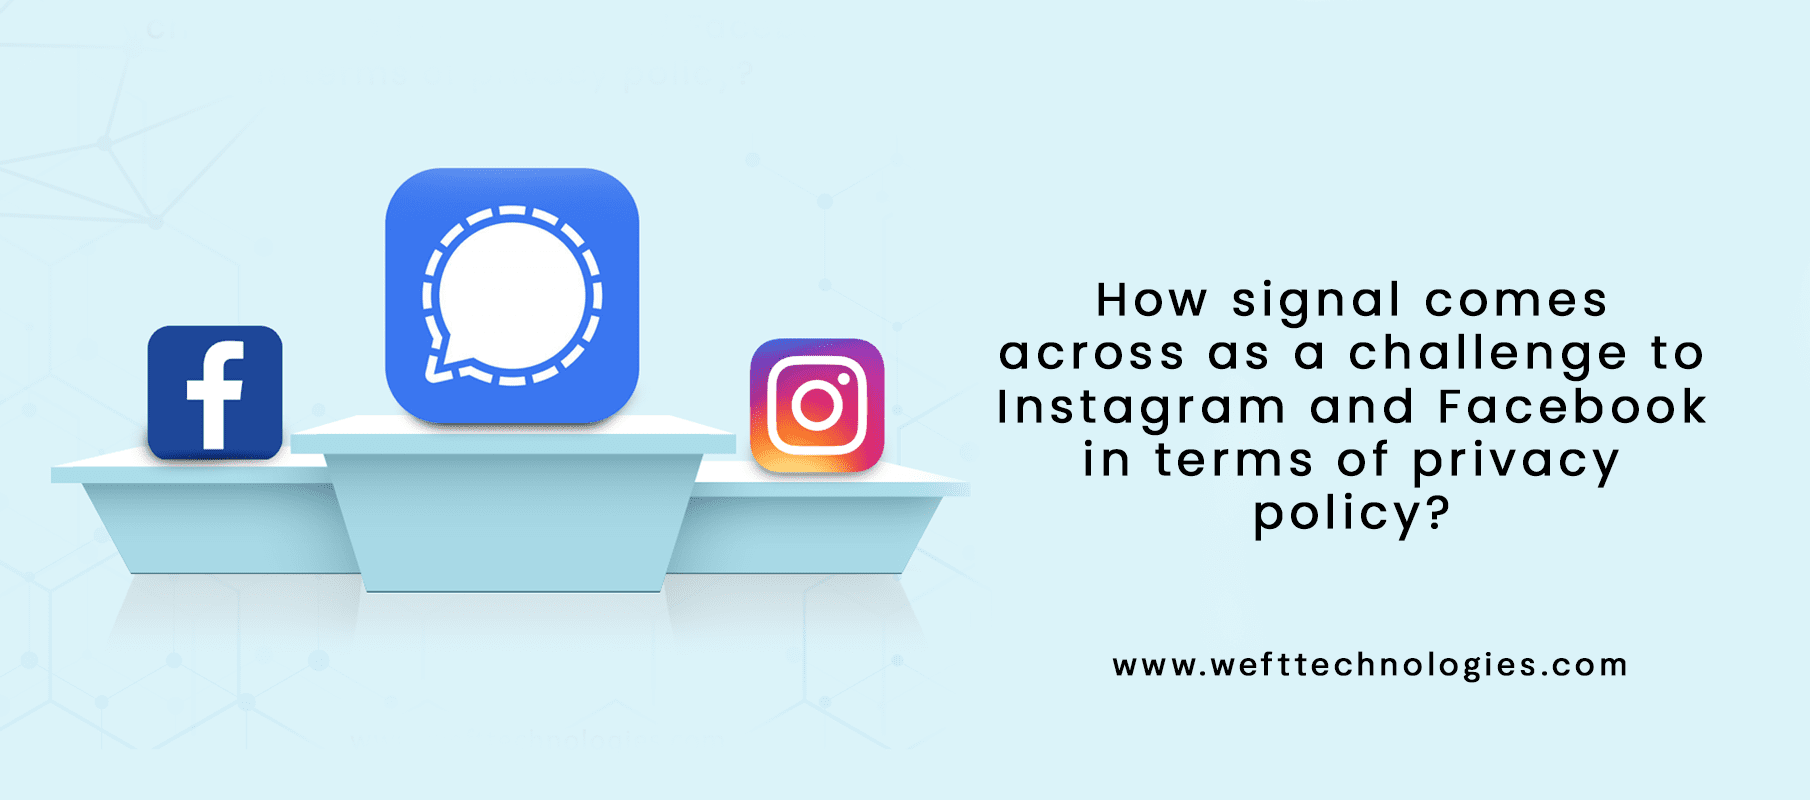 How Signal Comes Across as a Challenge to Insta and FB in terms of Privacy Policy?